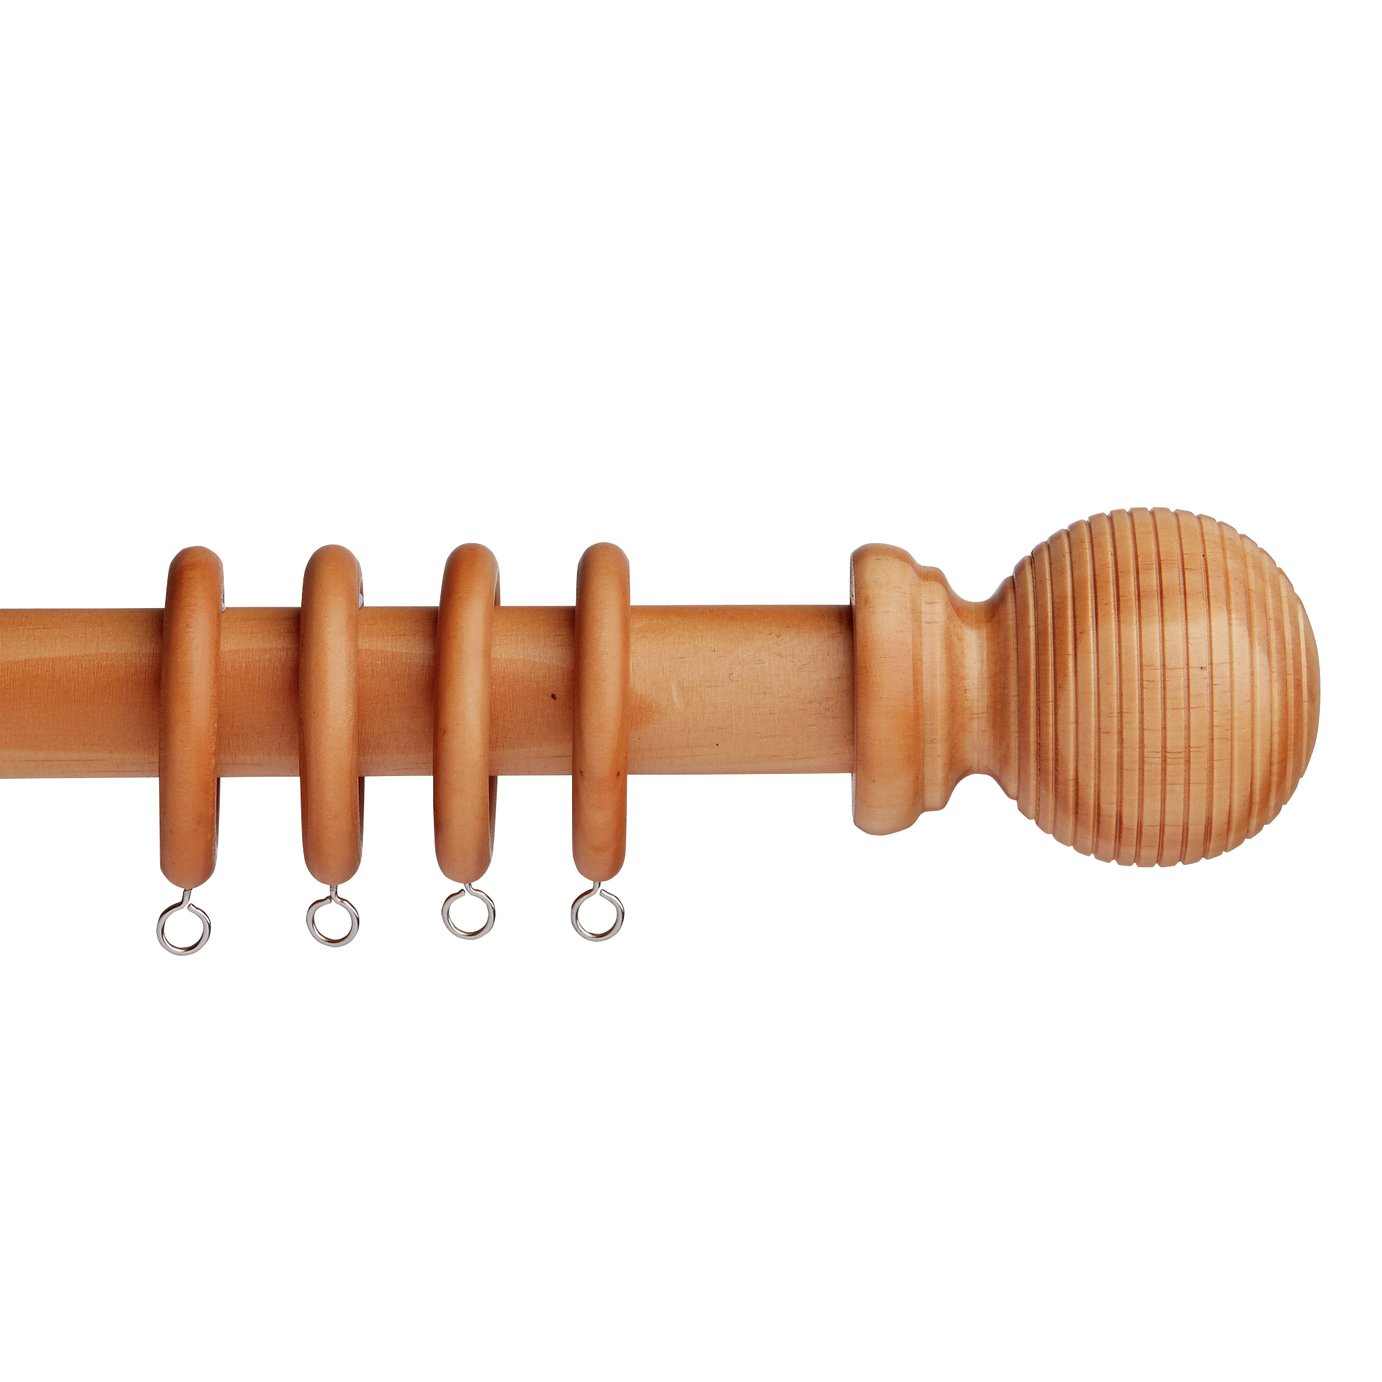 Argos Home 3m Grooved Ball Wooden Curtain Pole -Natural Wood